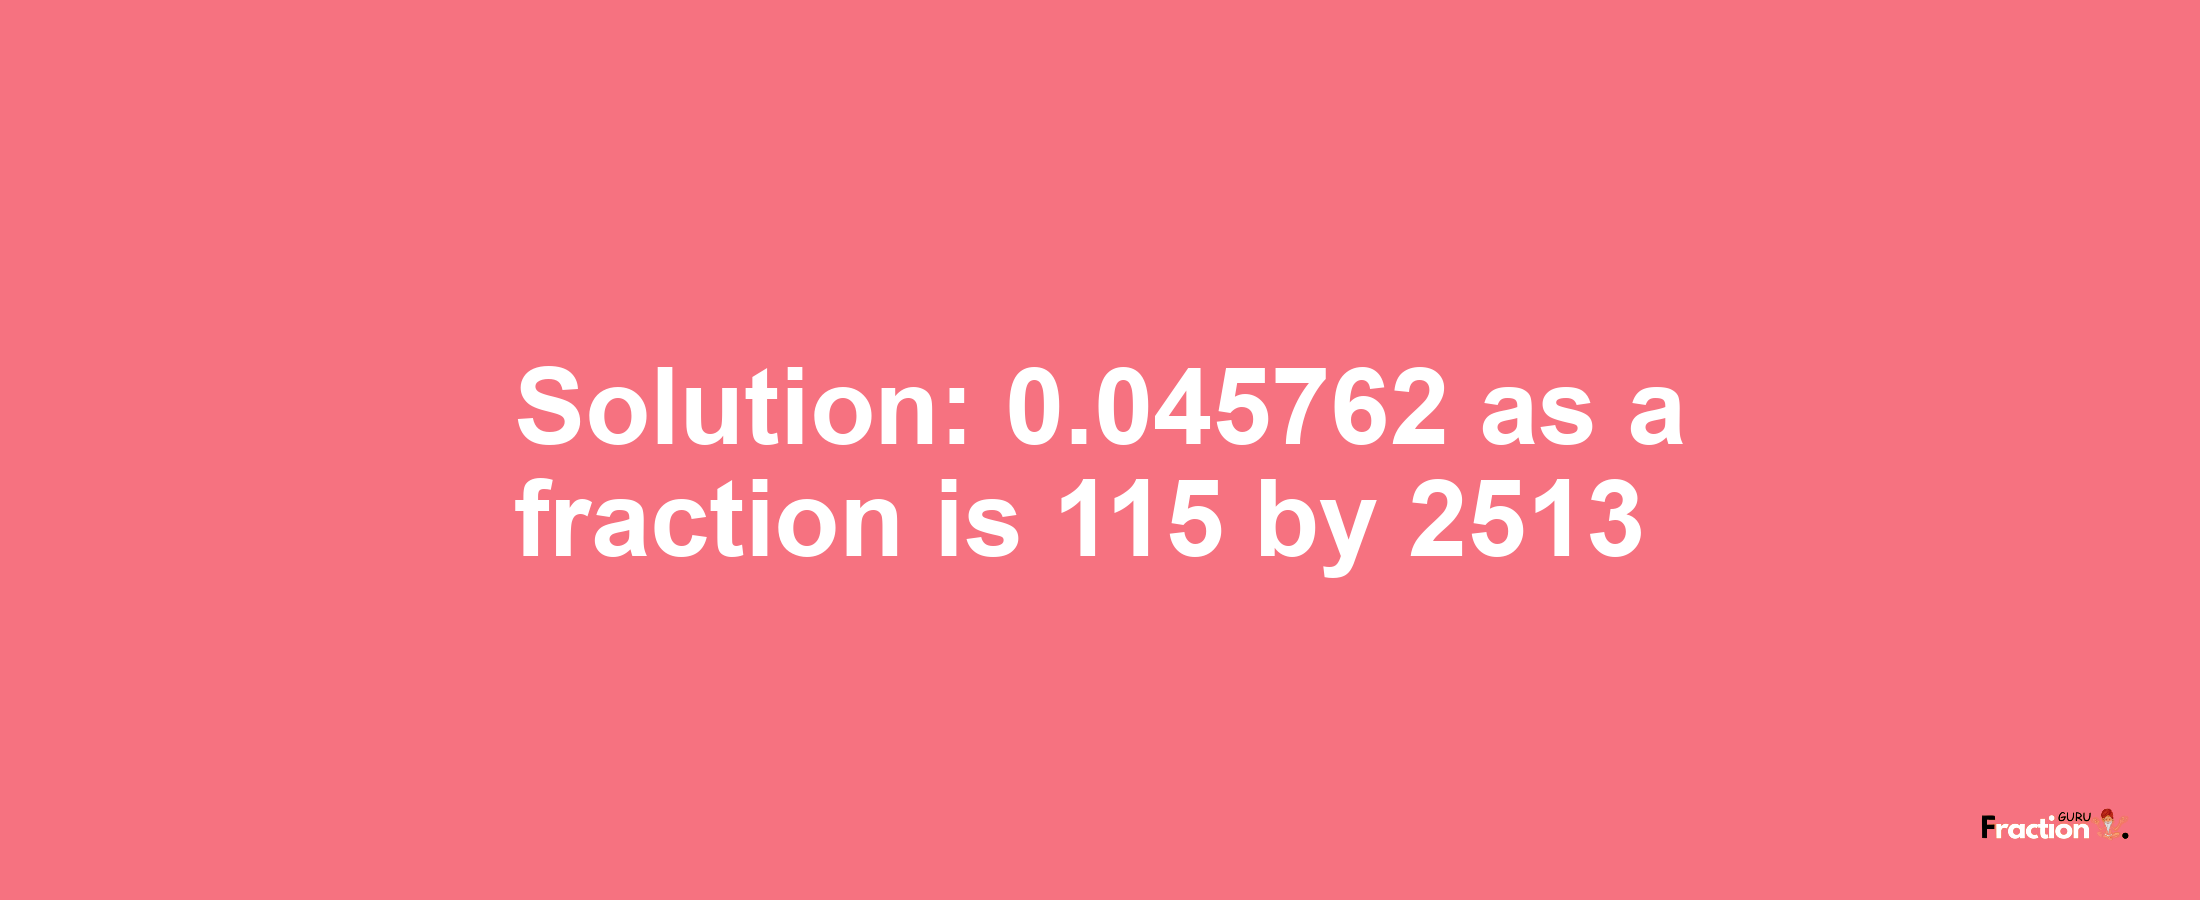 Solution:0.045762 as a fraction is 115/2513